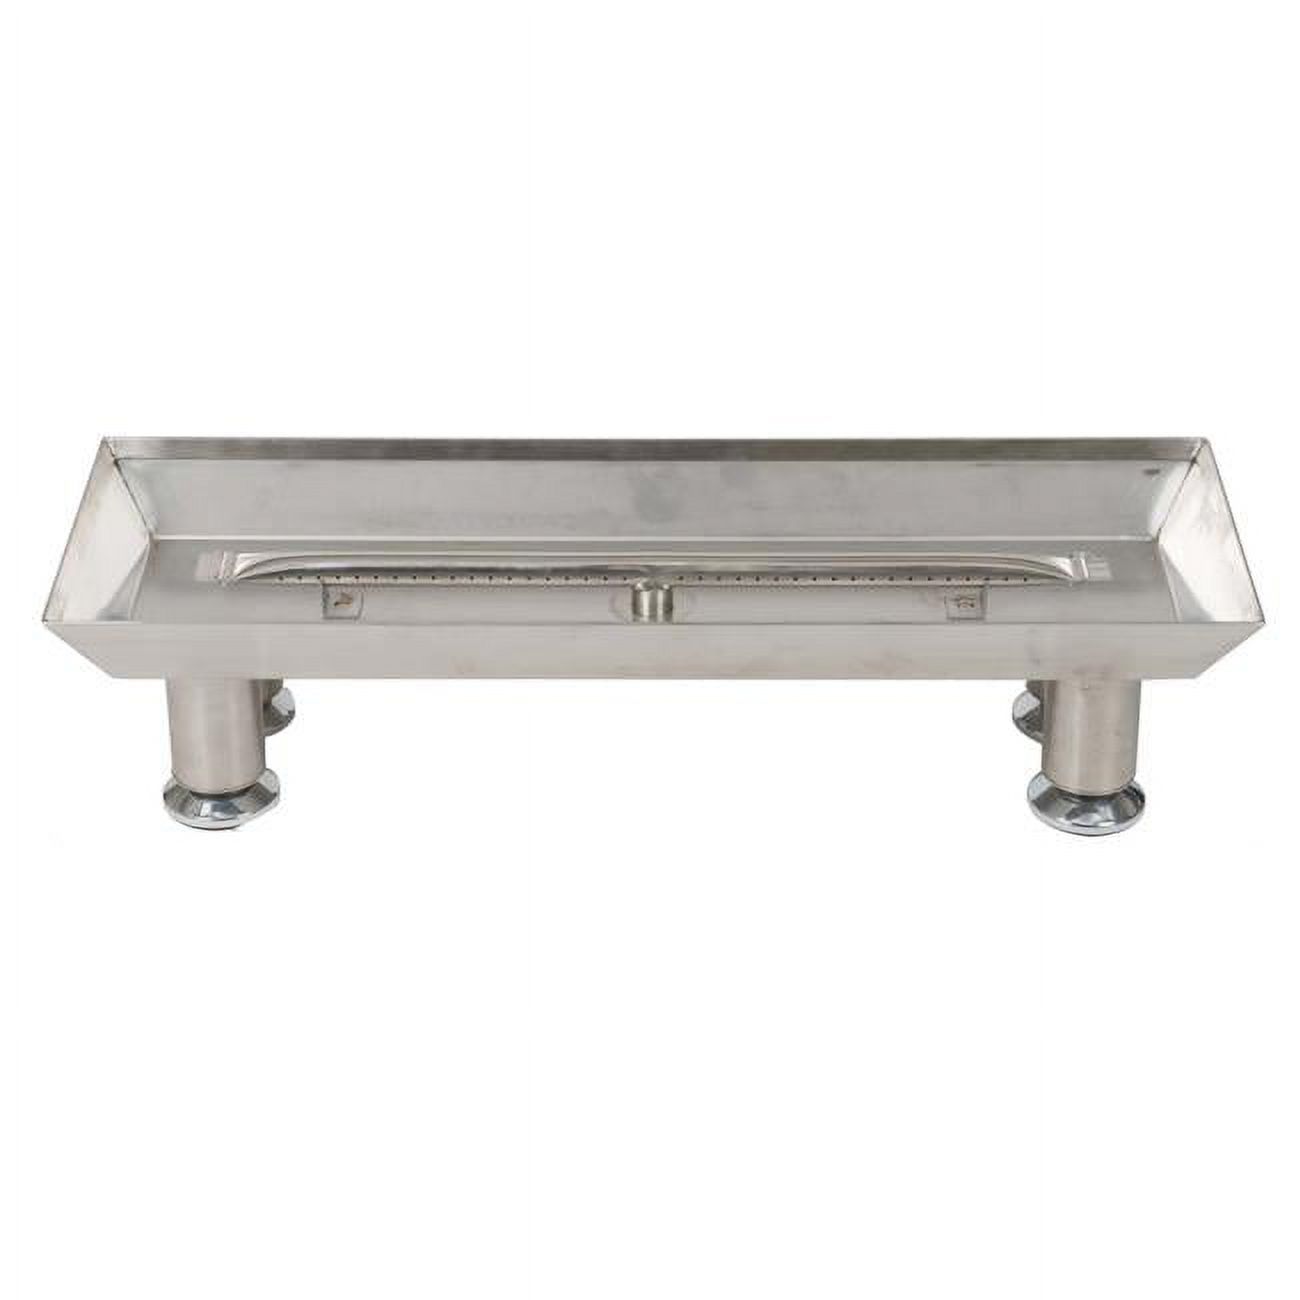 Dagan LBPS-18 Burner Pan with Straight Burner, Stainless Steel - image 1 of 1